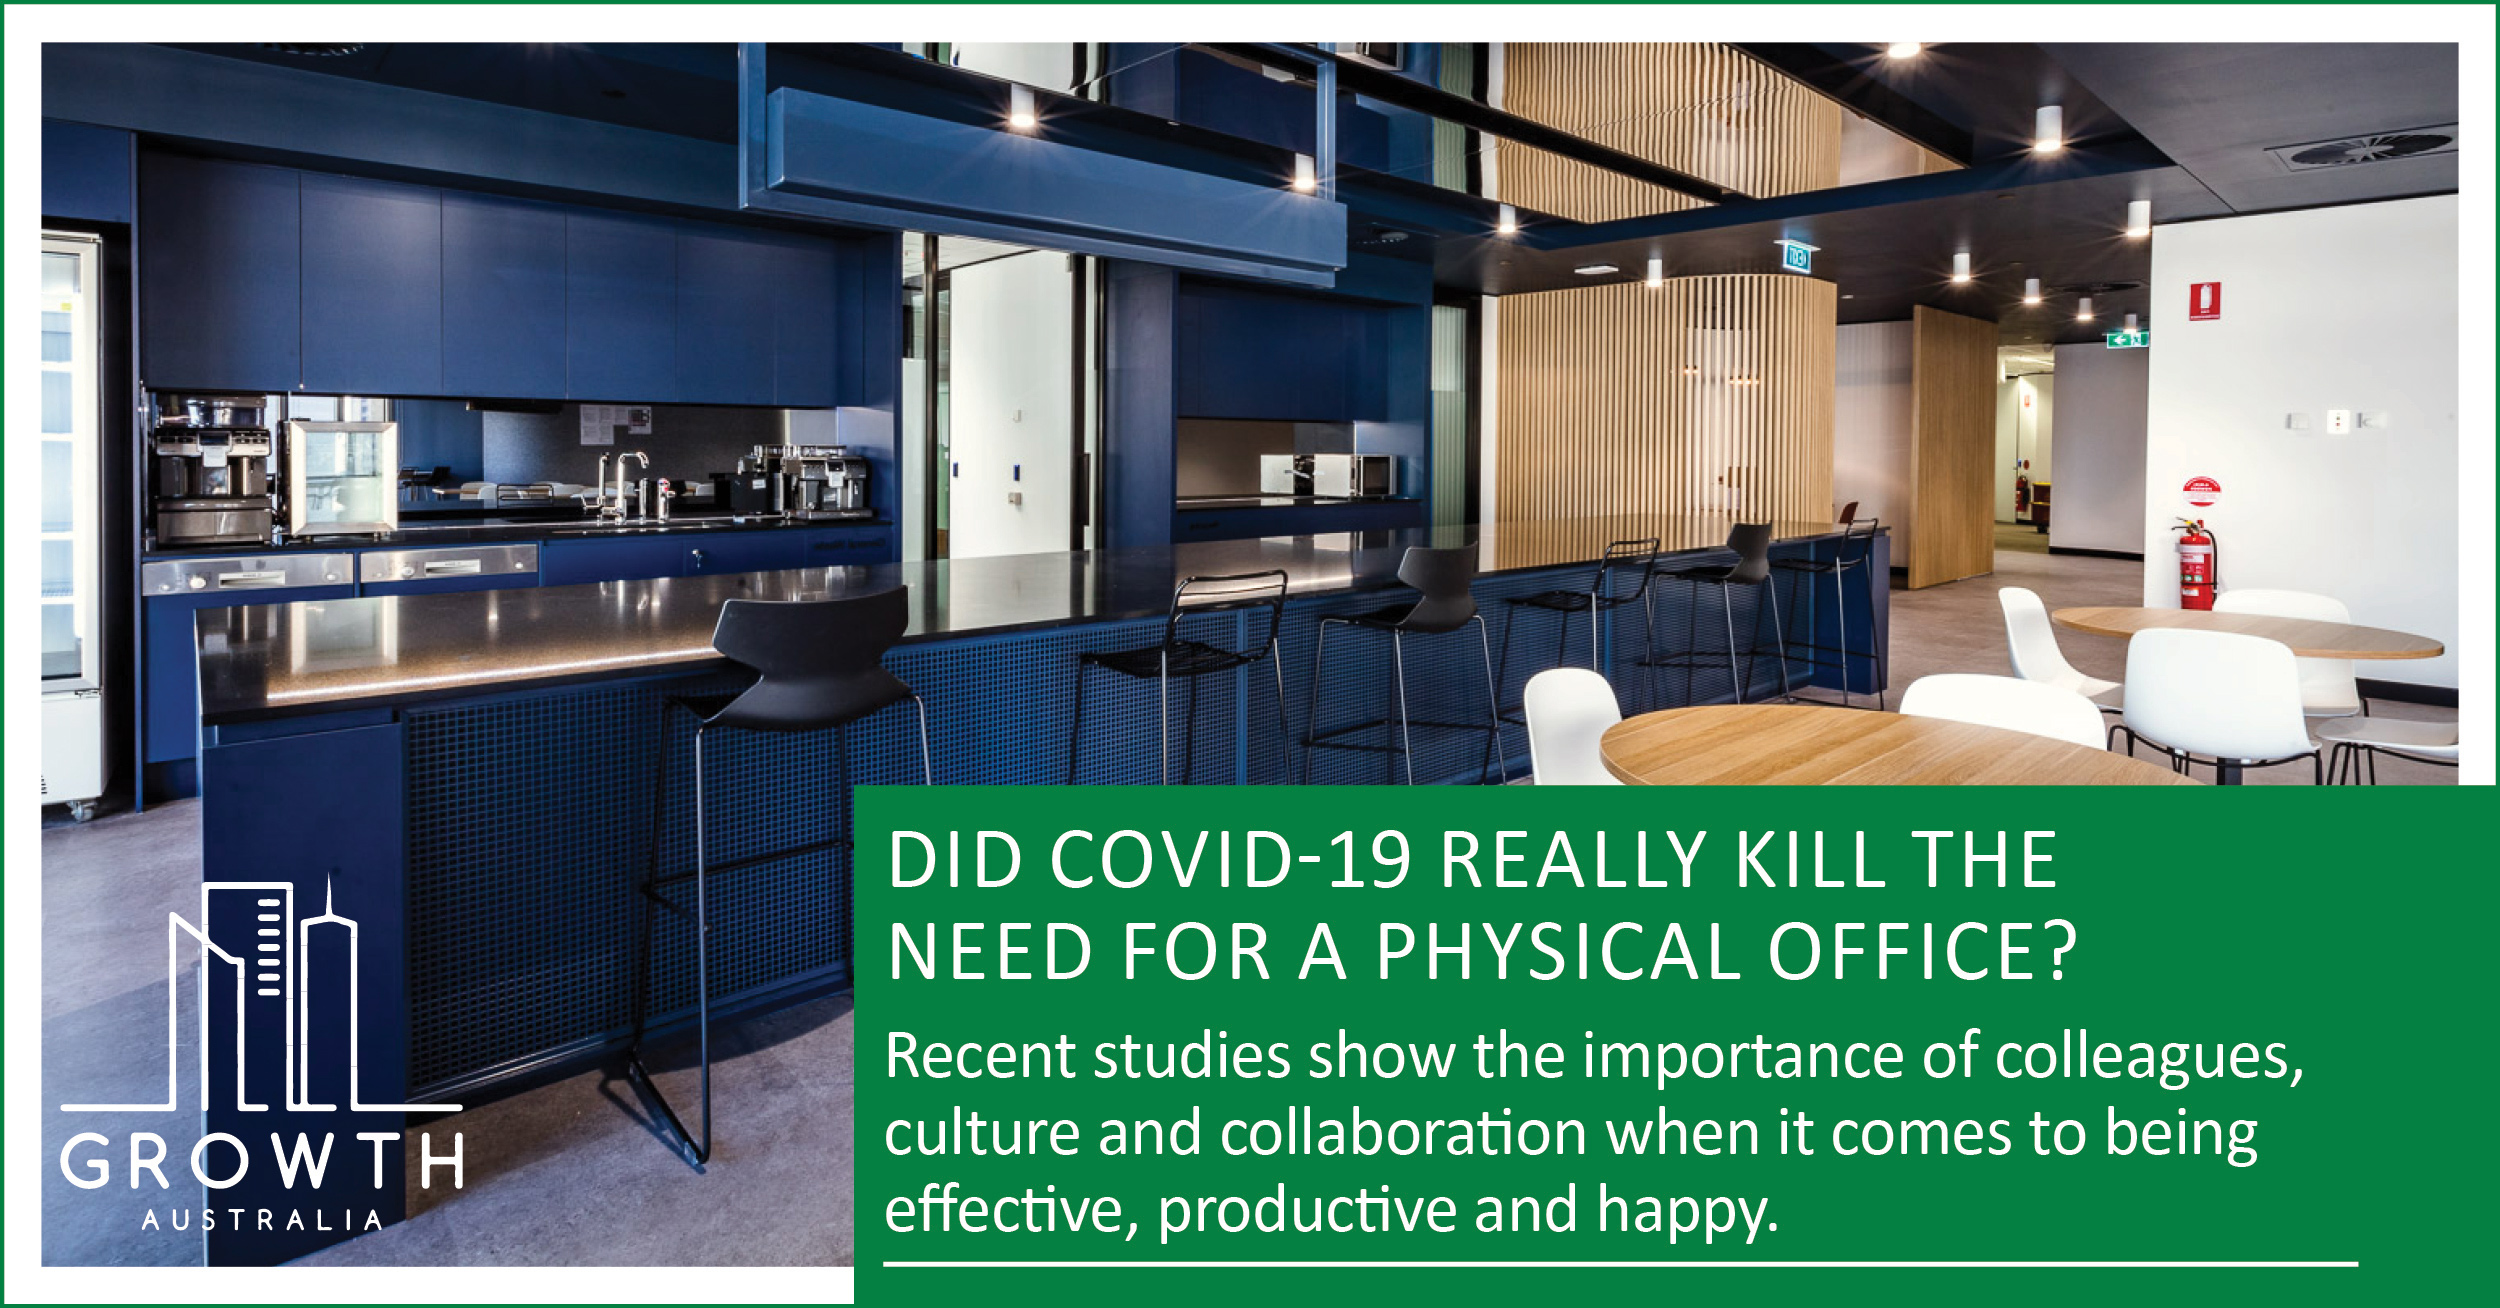 Did COVID-19 really kill the need for a physical office?